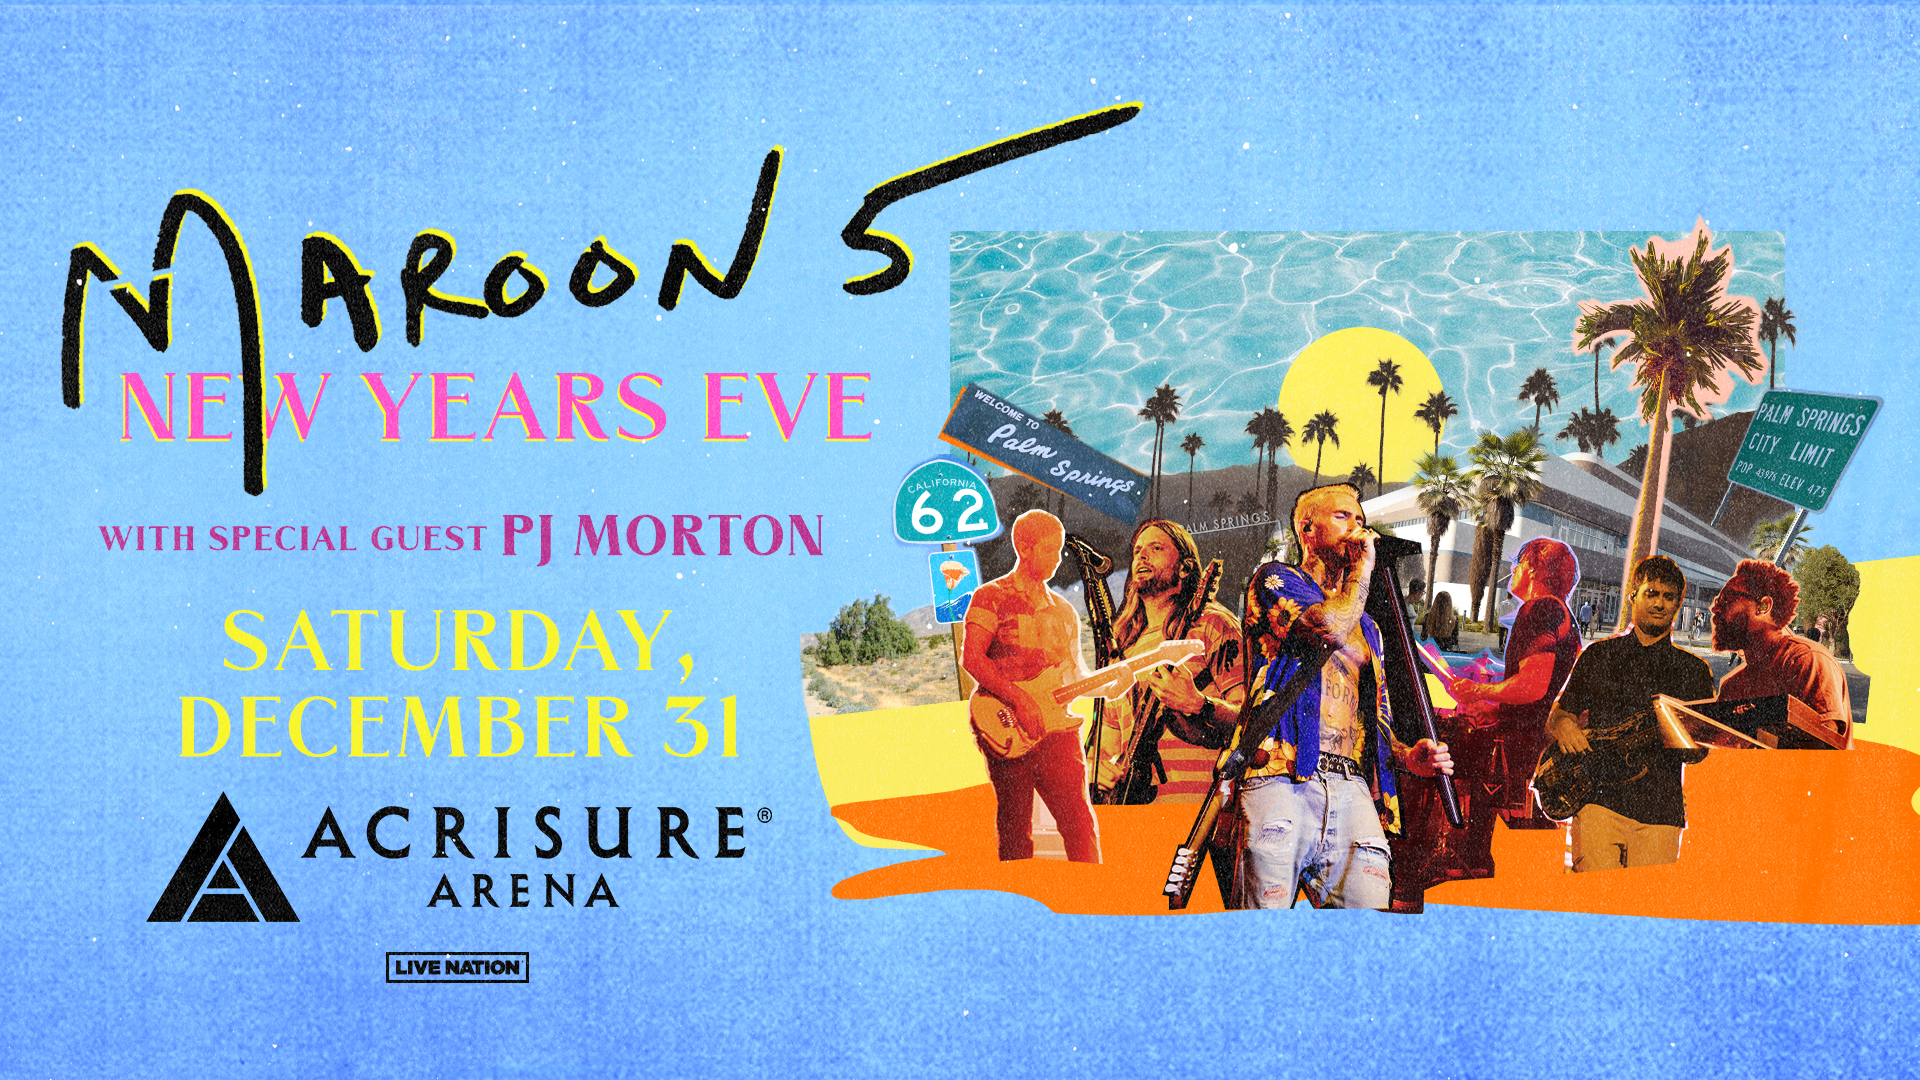 Maroon 5 New Years Eve with special guest PJ Morton